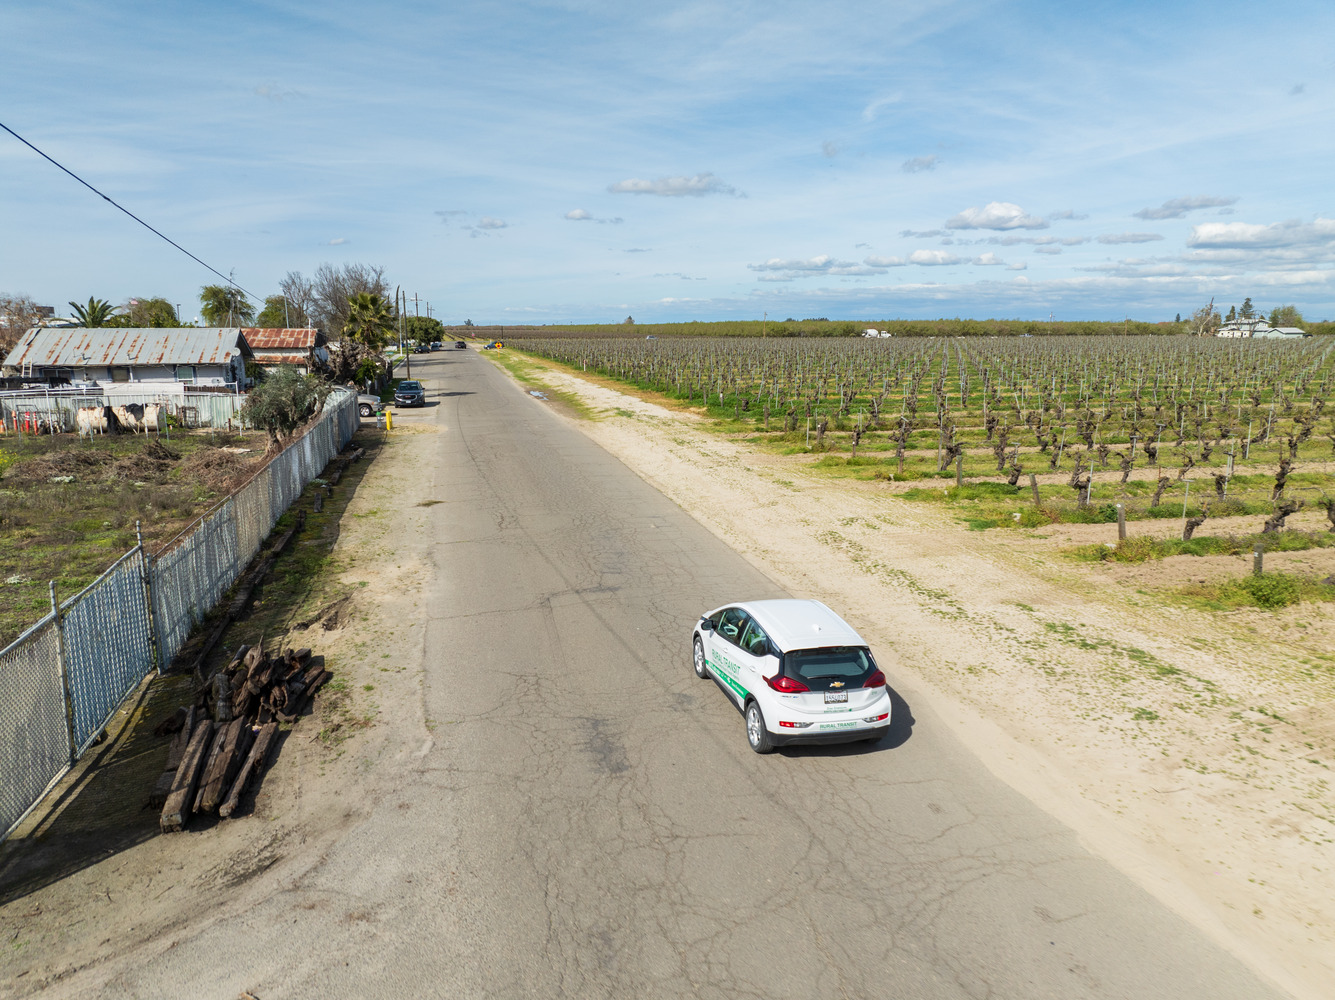 An EV microtransit vehicle drives on the edge of a small town, with farm fields on the opposite side of the road